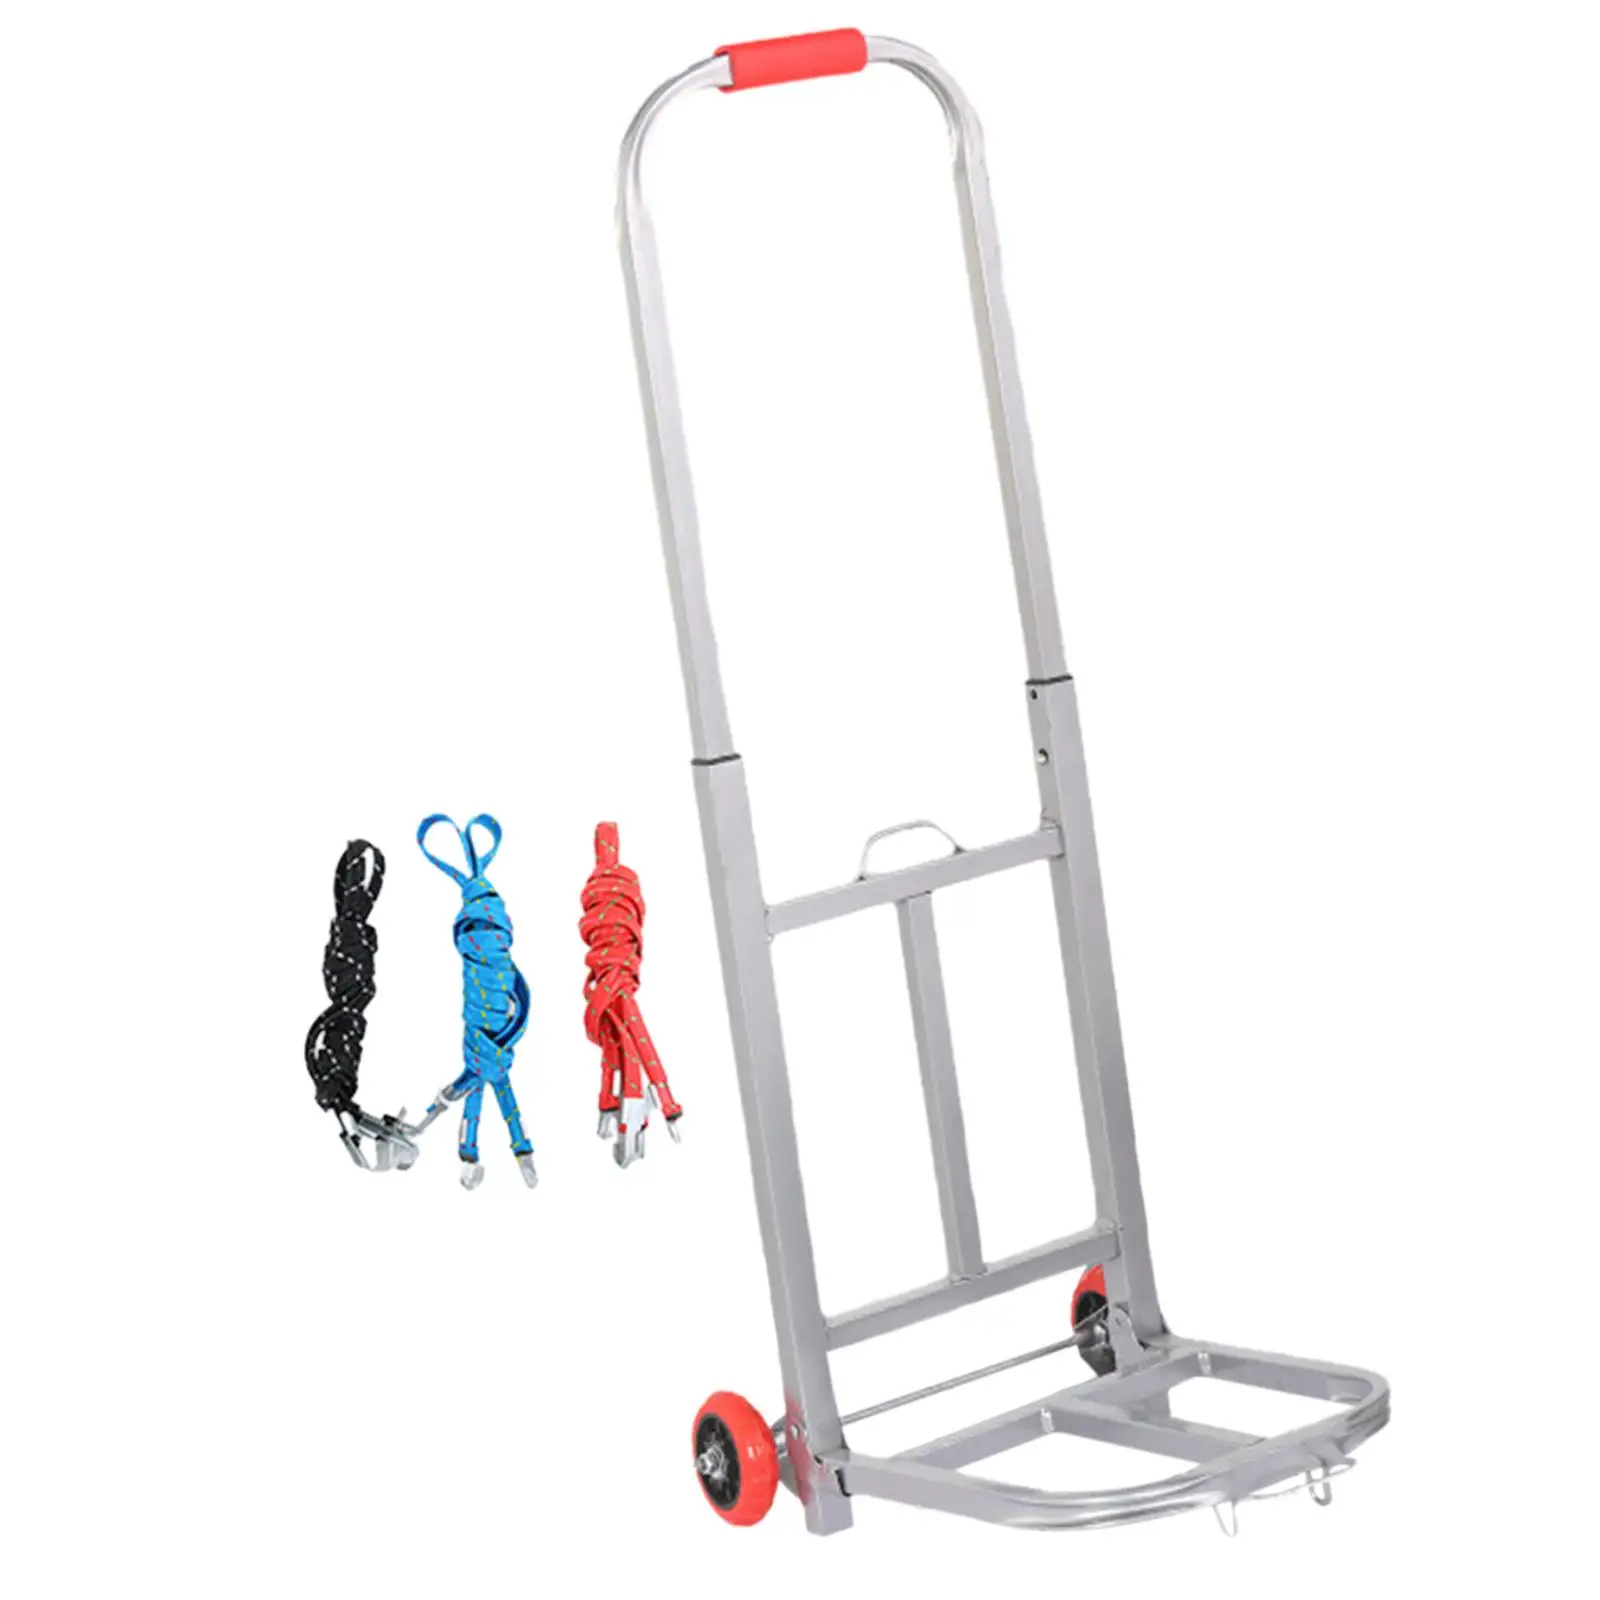 Foldable Folding Hand Truck Luggage Handcart Adjustable Handle for Daily Use